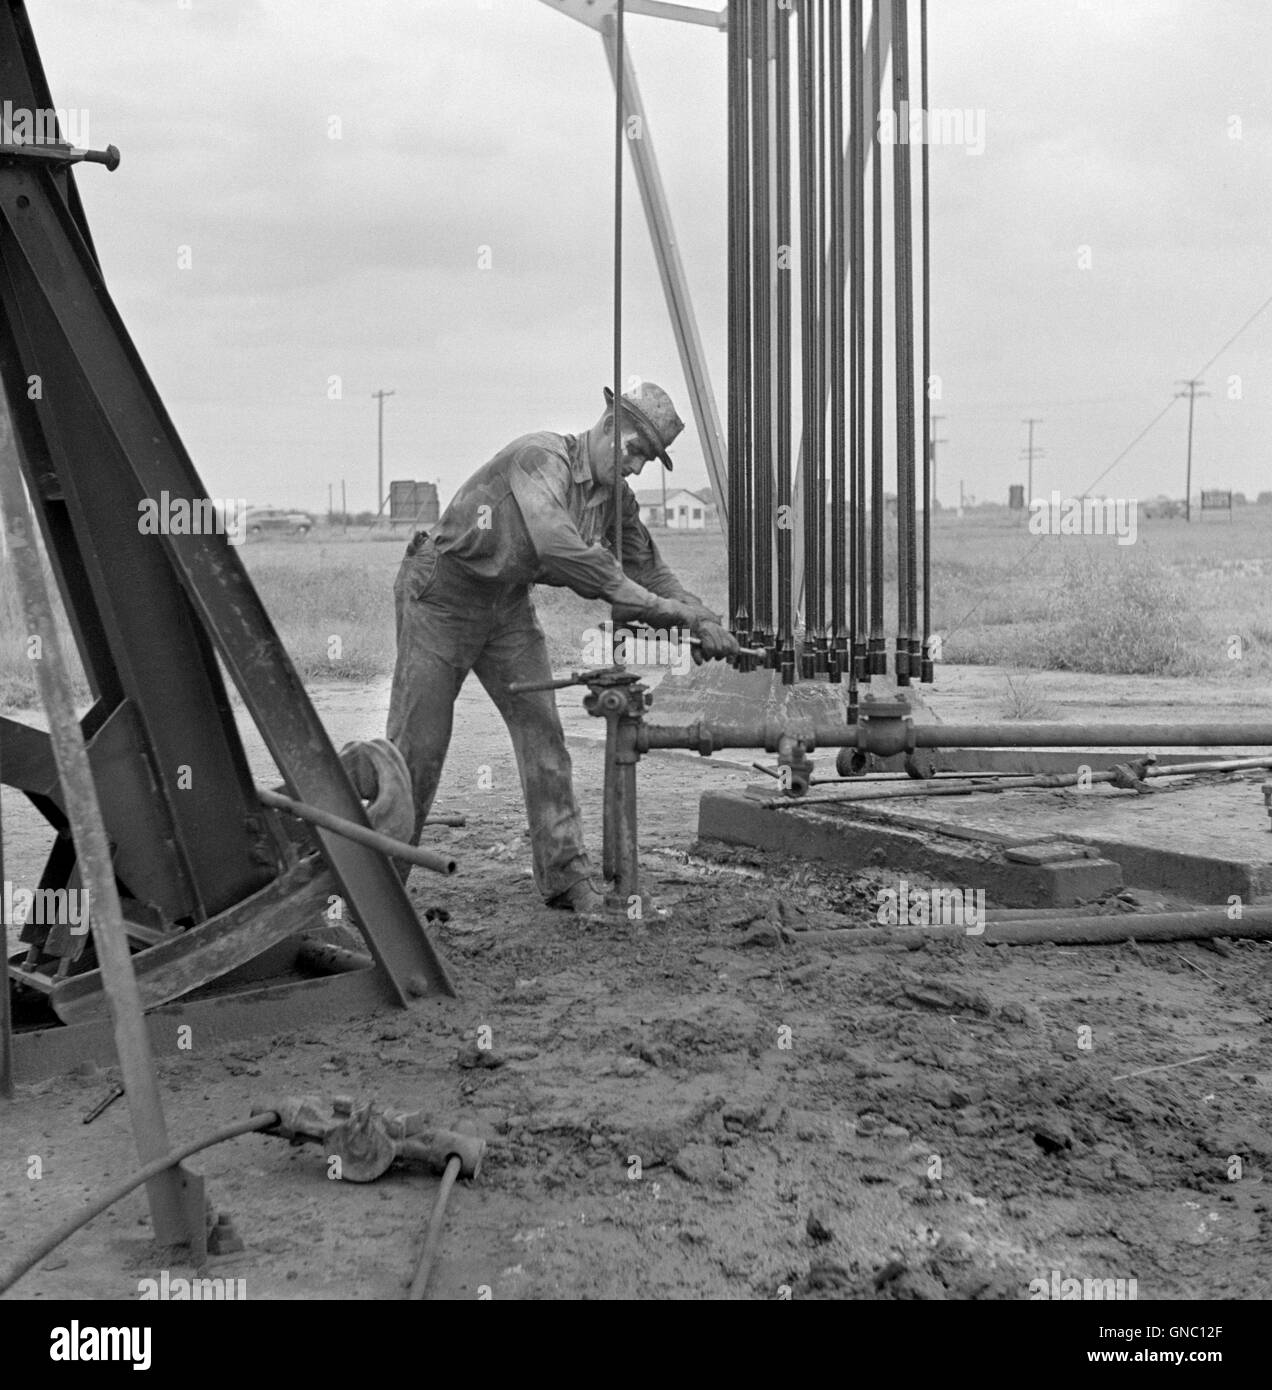 Man Servicing Old Oil Well, near Wichita, Kansas, USA, Marion Post Wolcott for Farm Security Administration, September 1941 Stock Photo